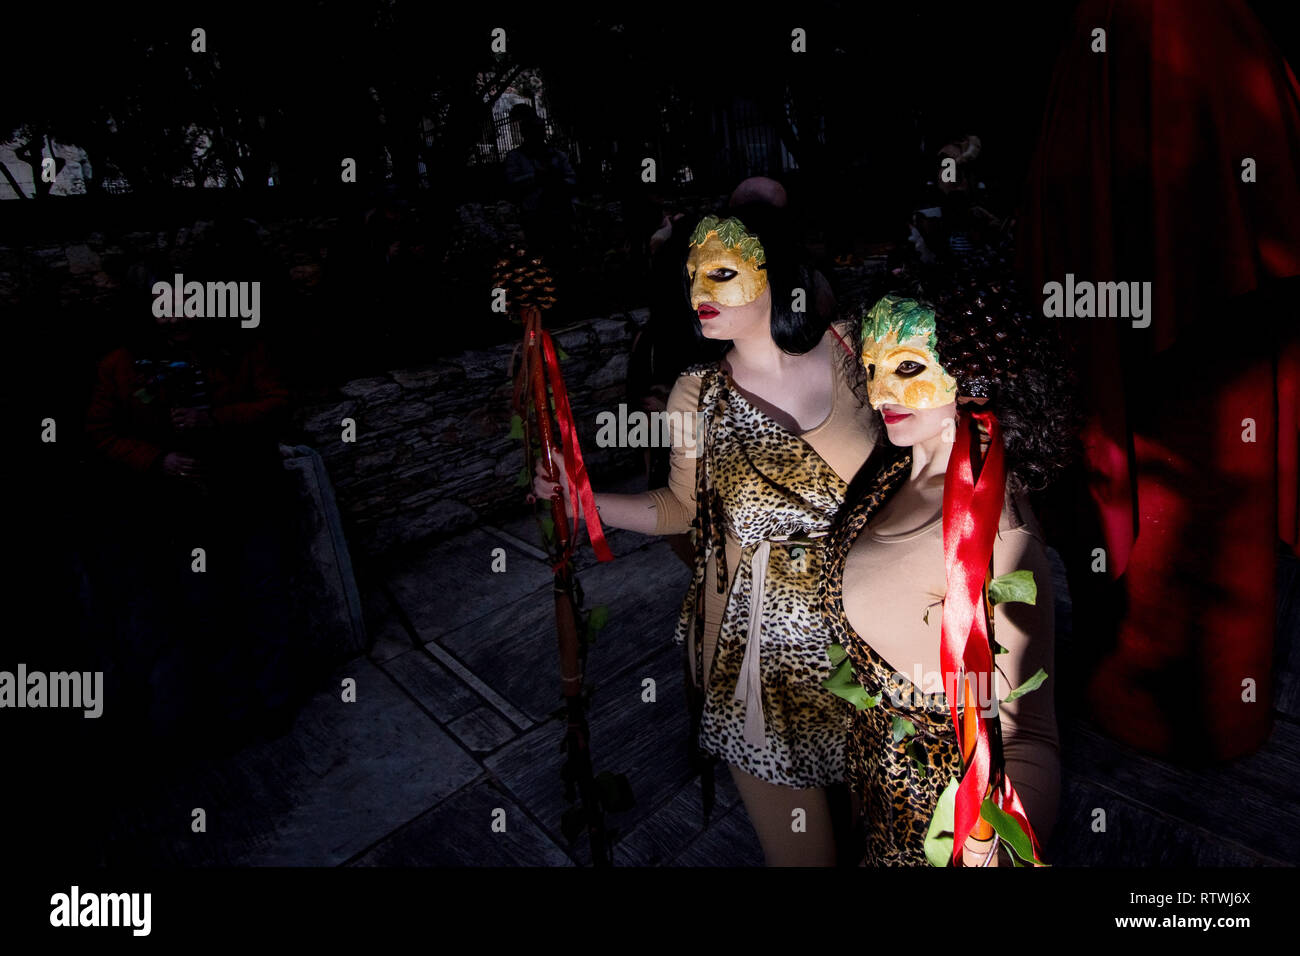 Women are seen dressed up during the Falliforia or Fallagogia, an ancient Greek festival honoring the god Dionysus with orgiastic character. Stock Photo